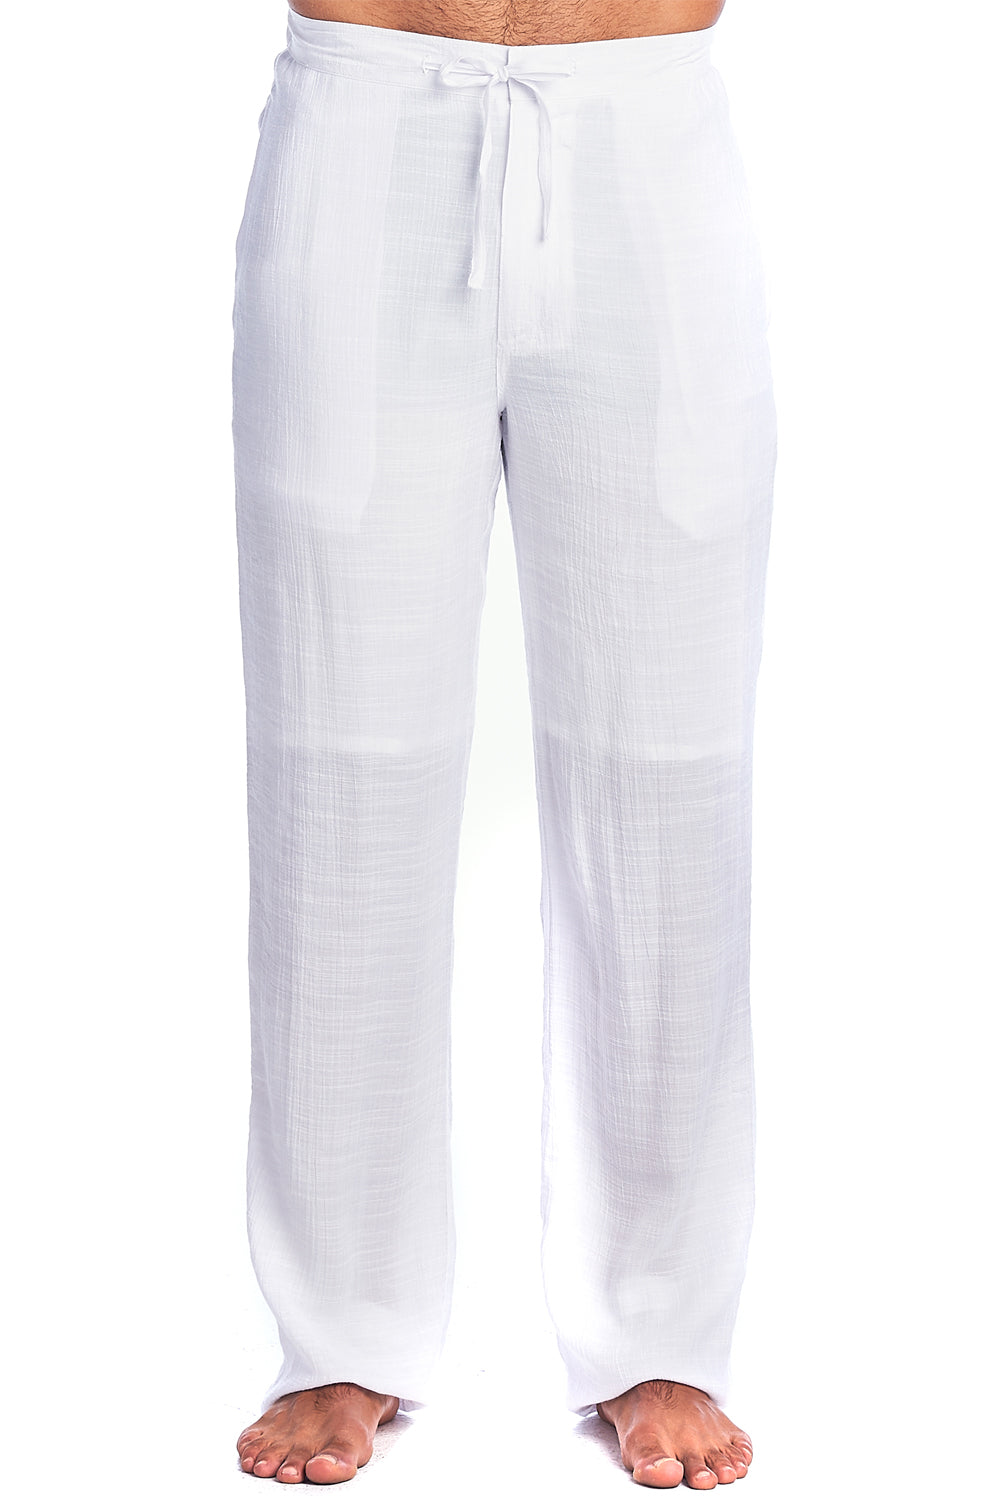 Buy Ketch Bright White Regular Fit Cargos for Men Online at Rs.789 - Ketch